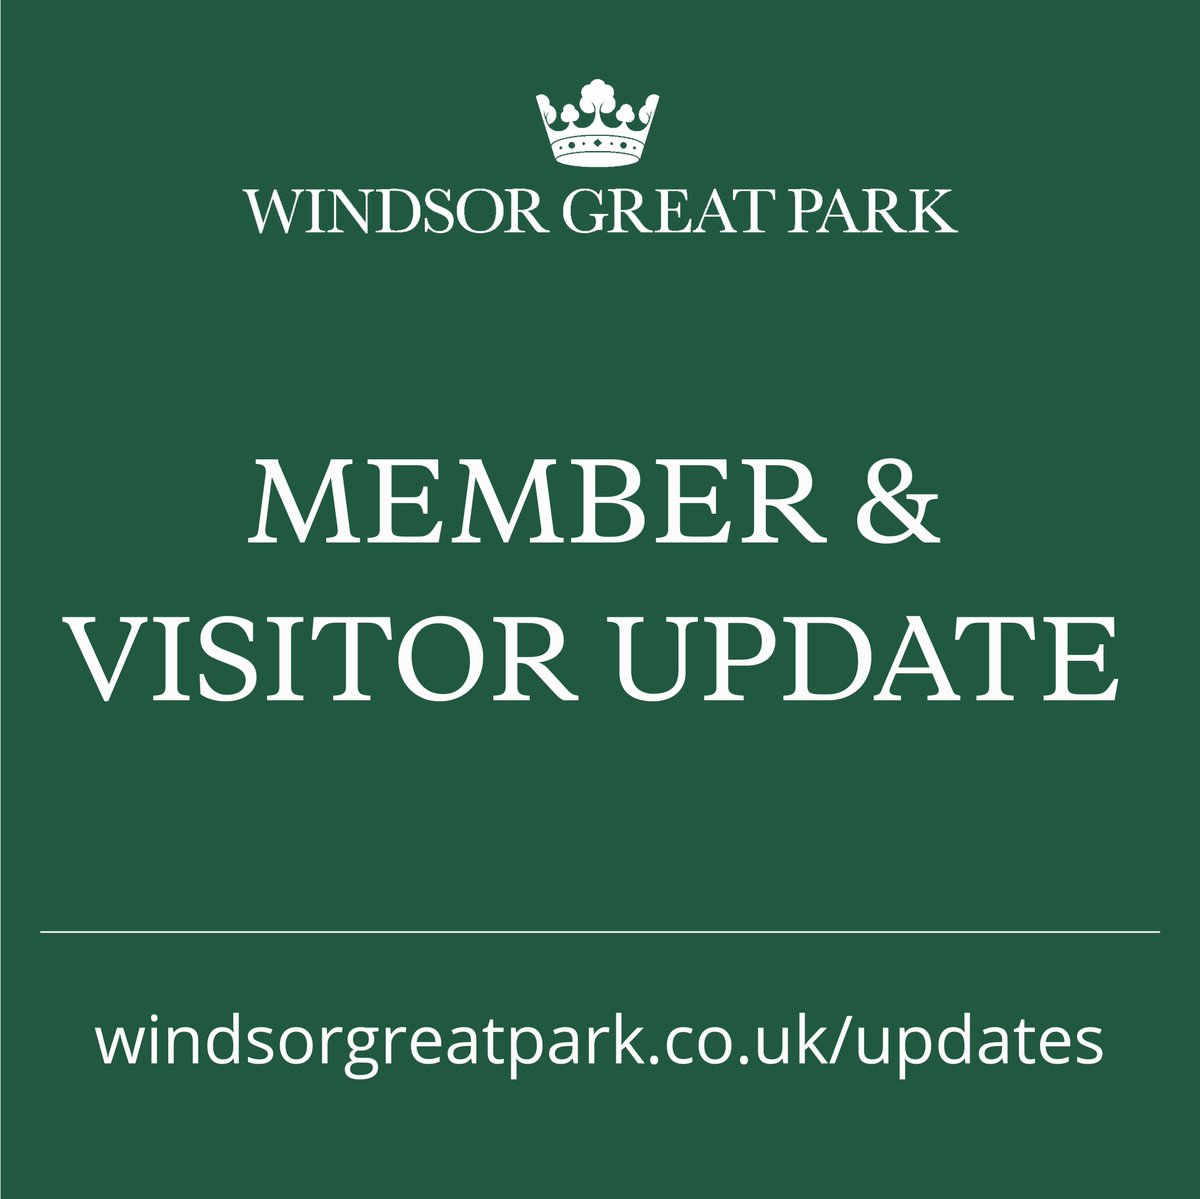 We are delighted to advise that all facilities at Windsor Great Park are open. From the team at Windsor, we wish you a wonderful weekend.